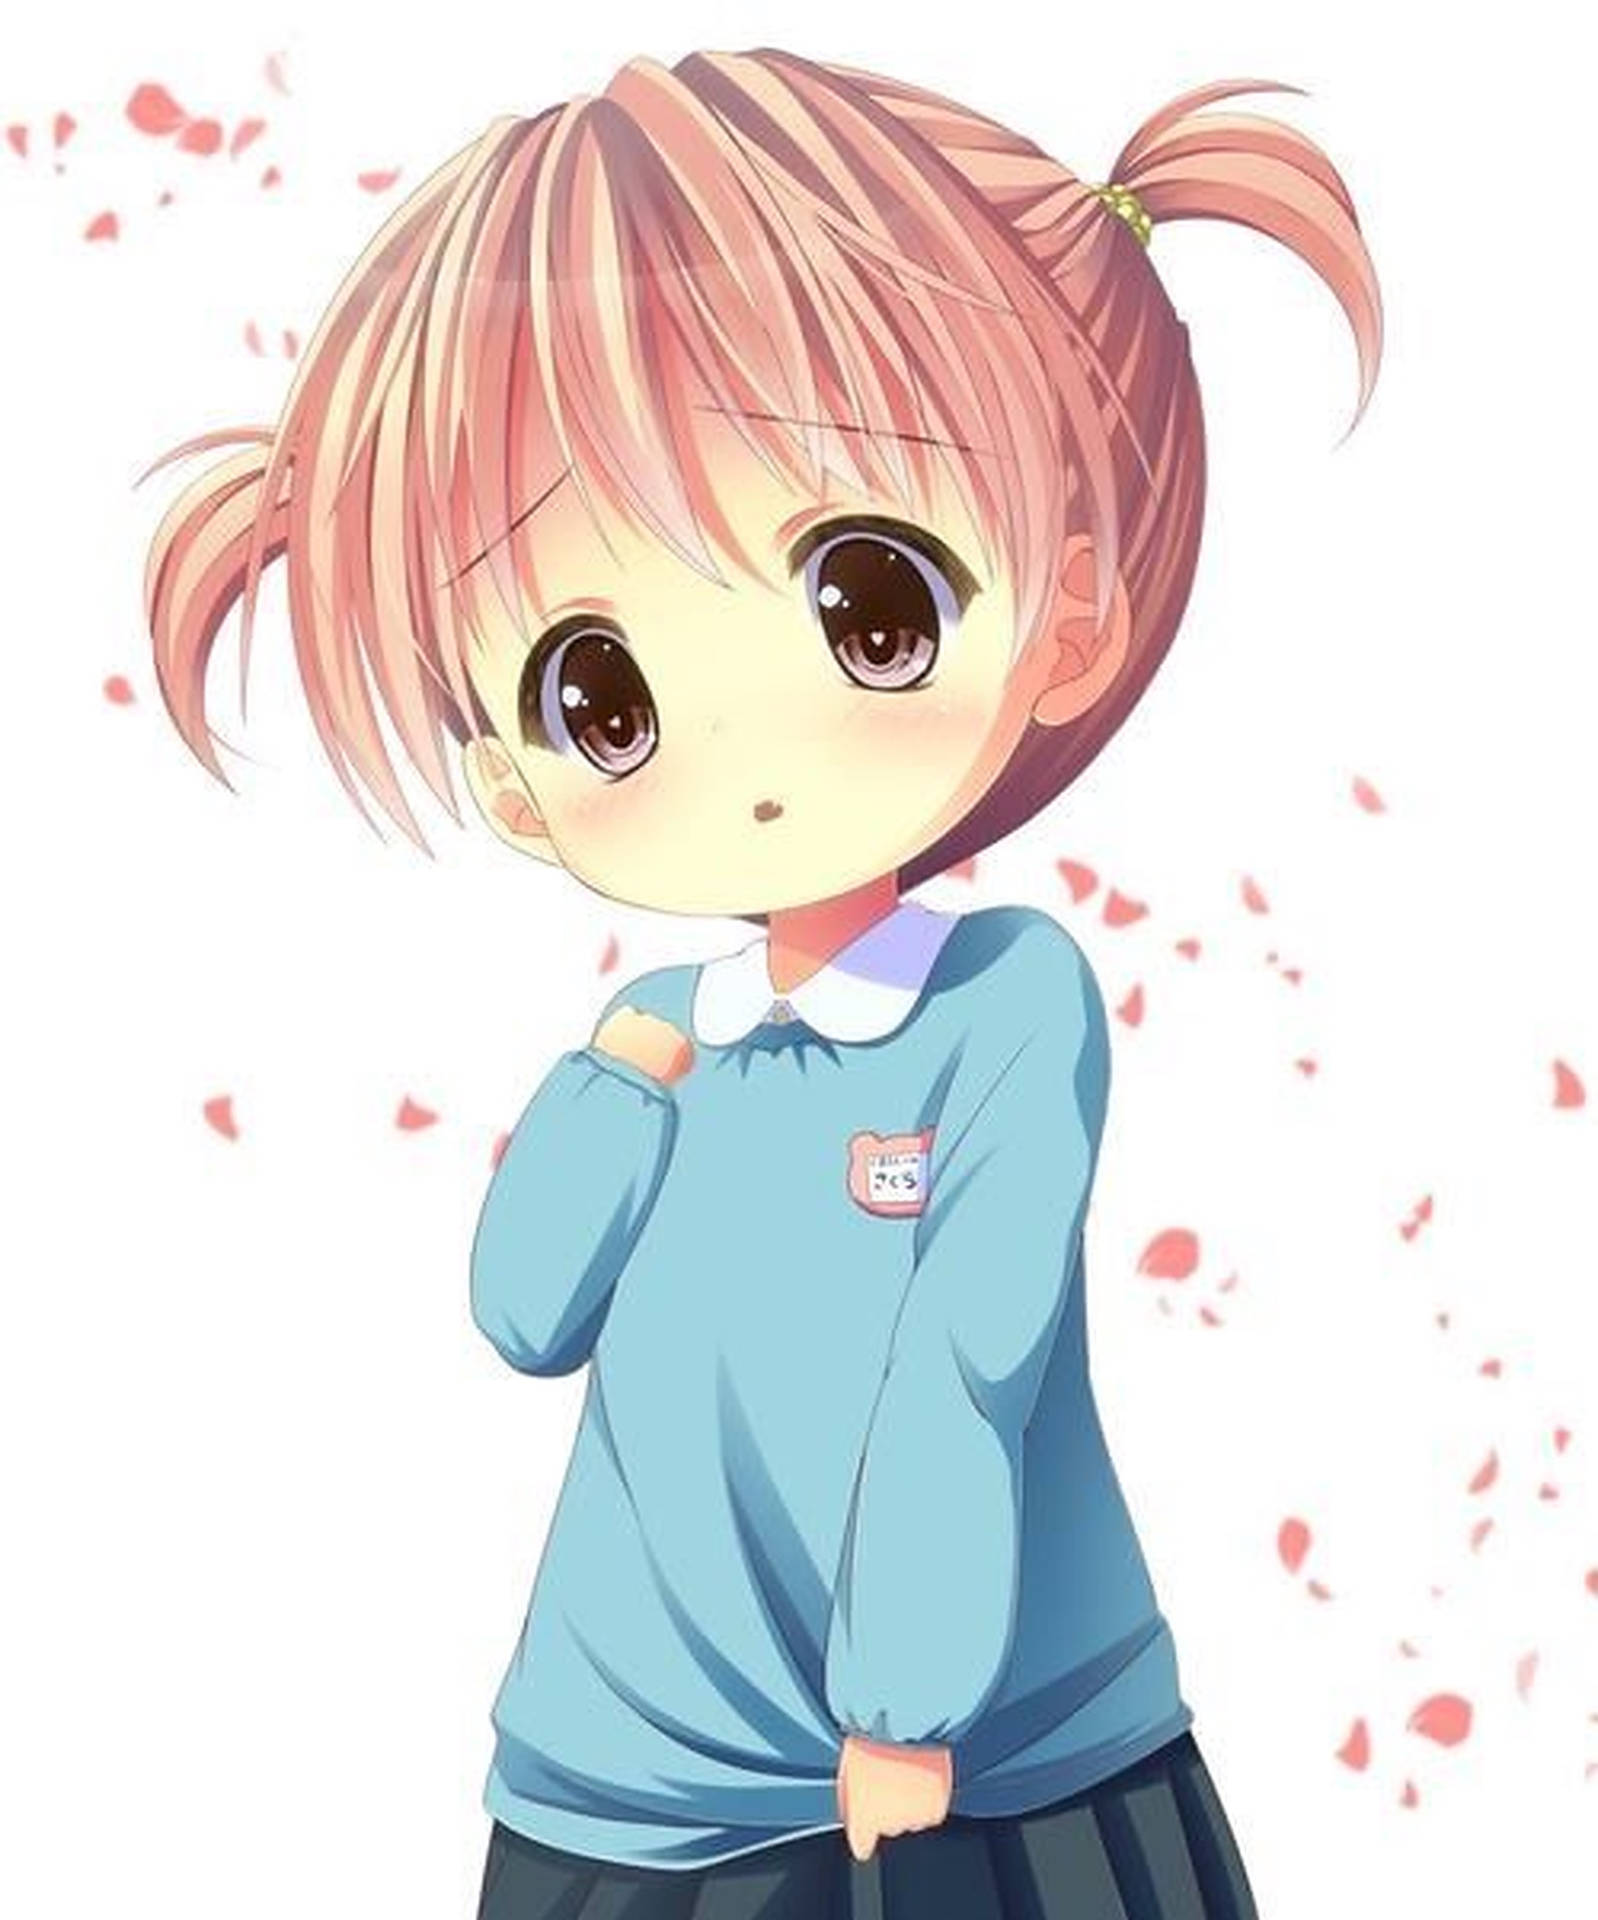 Anime Kid With Pink Hair Wallpaper